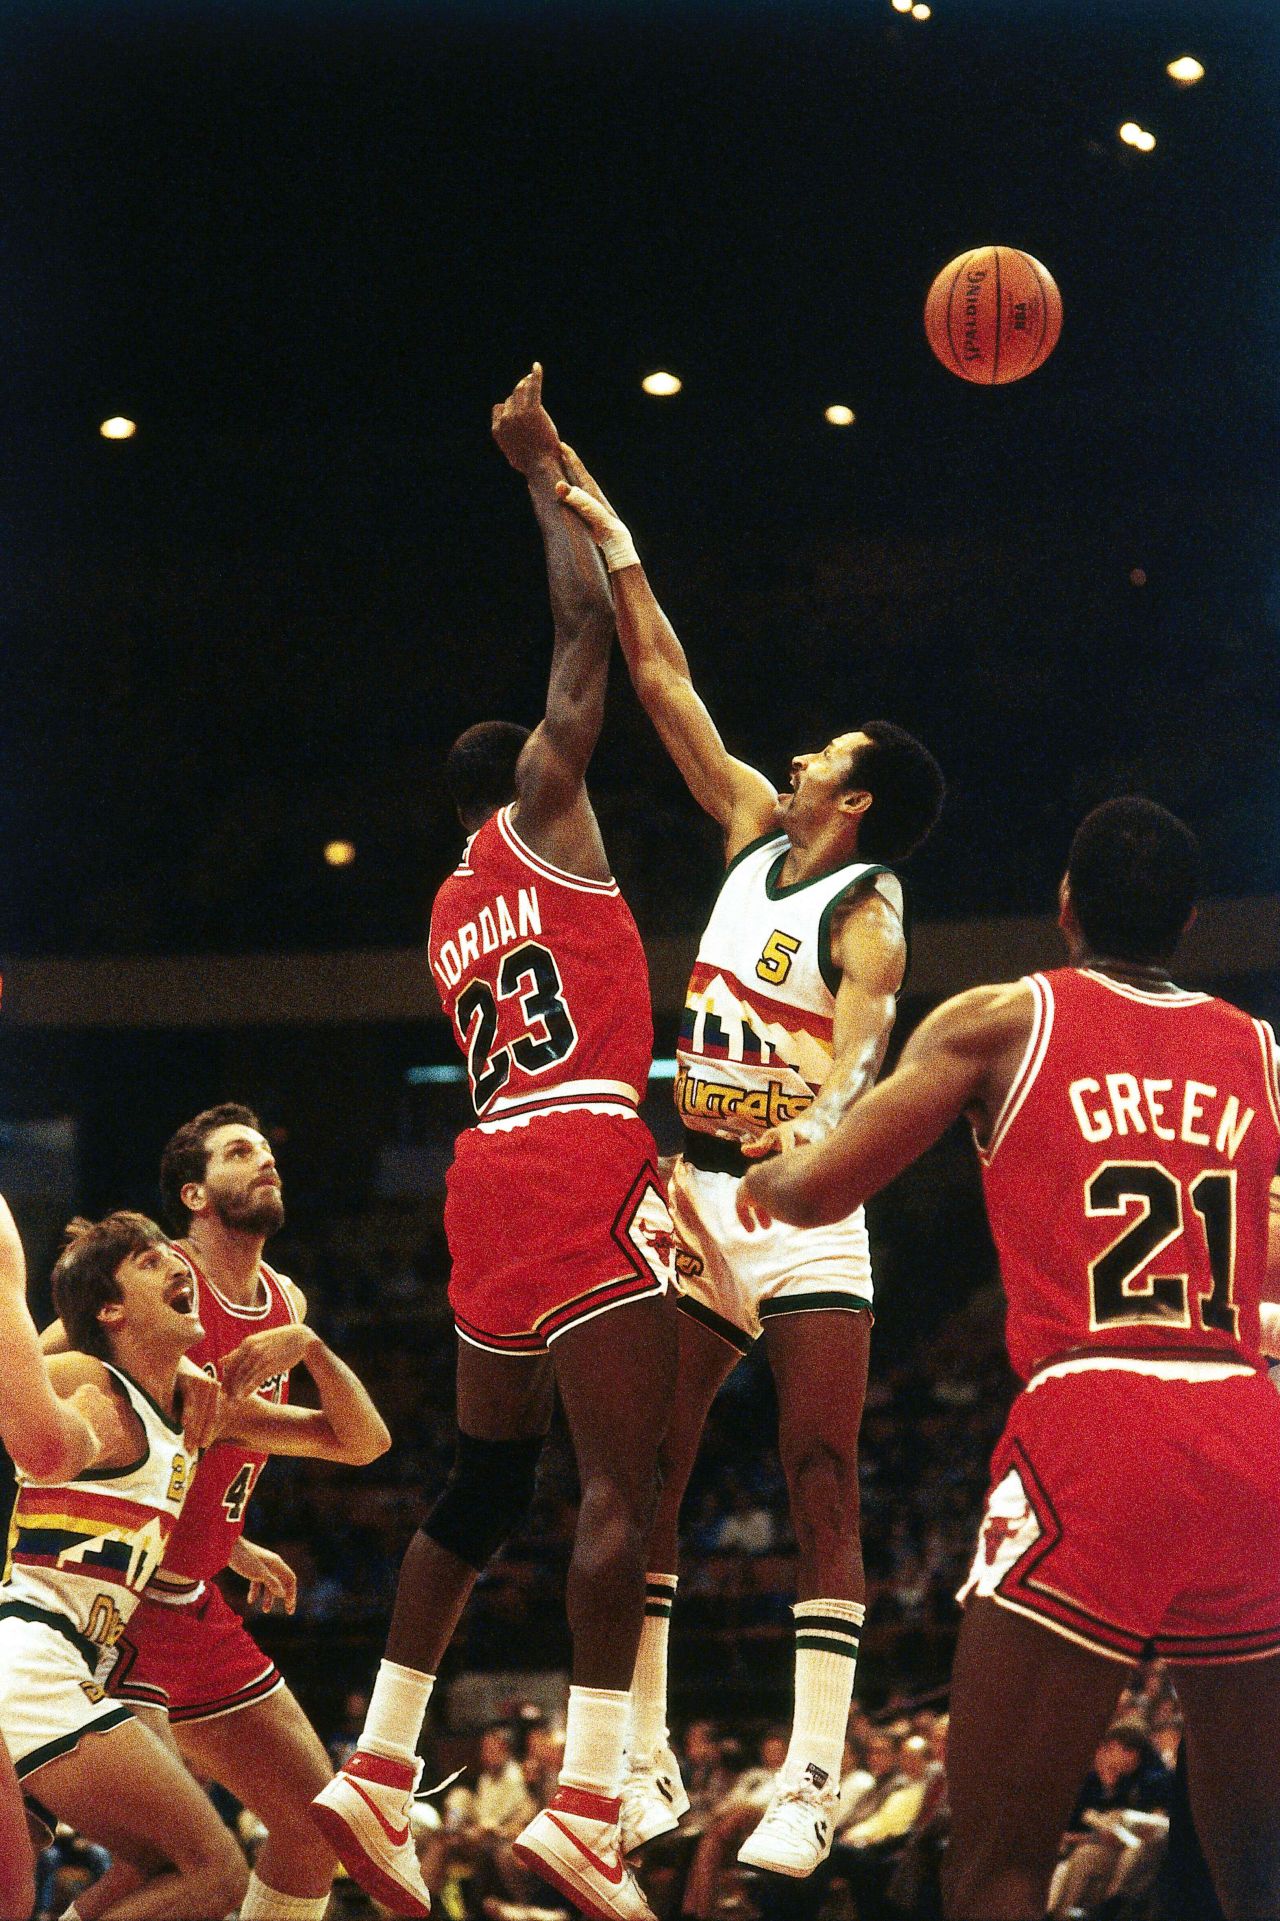 Michael Jordan playing for the Chicago Bulls during the 1984 NBA game in Denver, Colorado. 